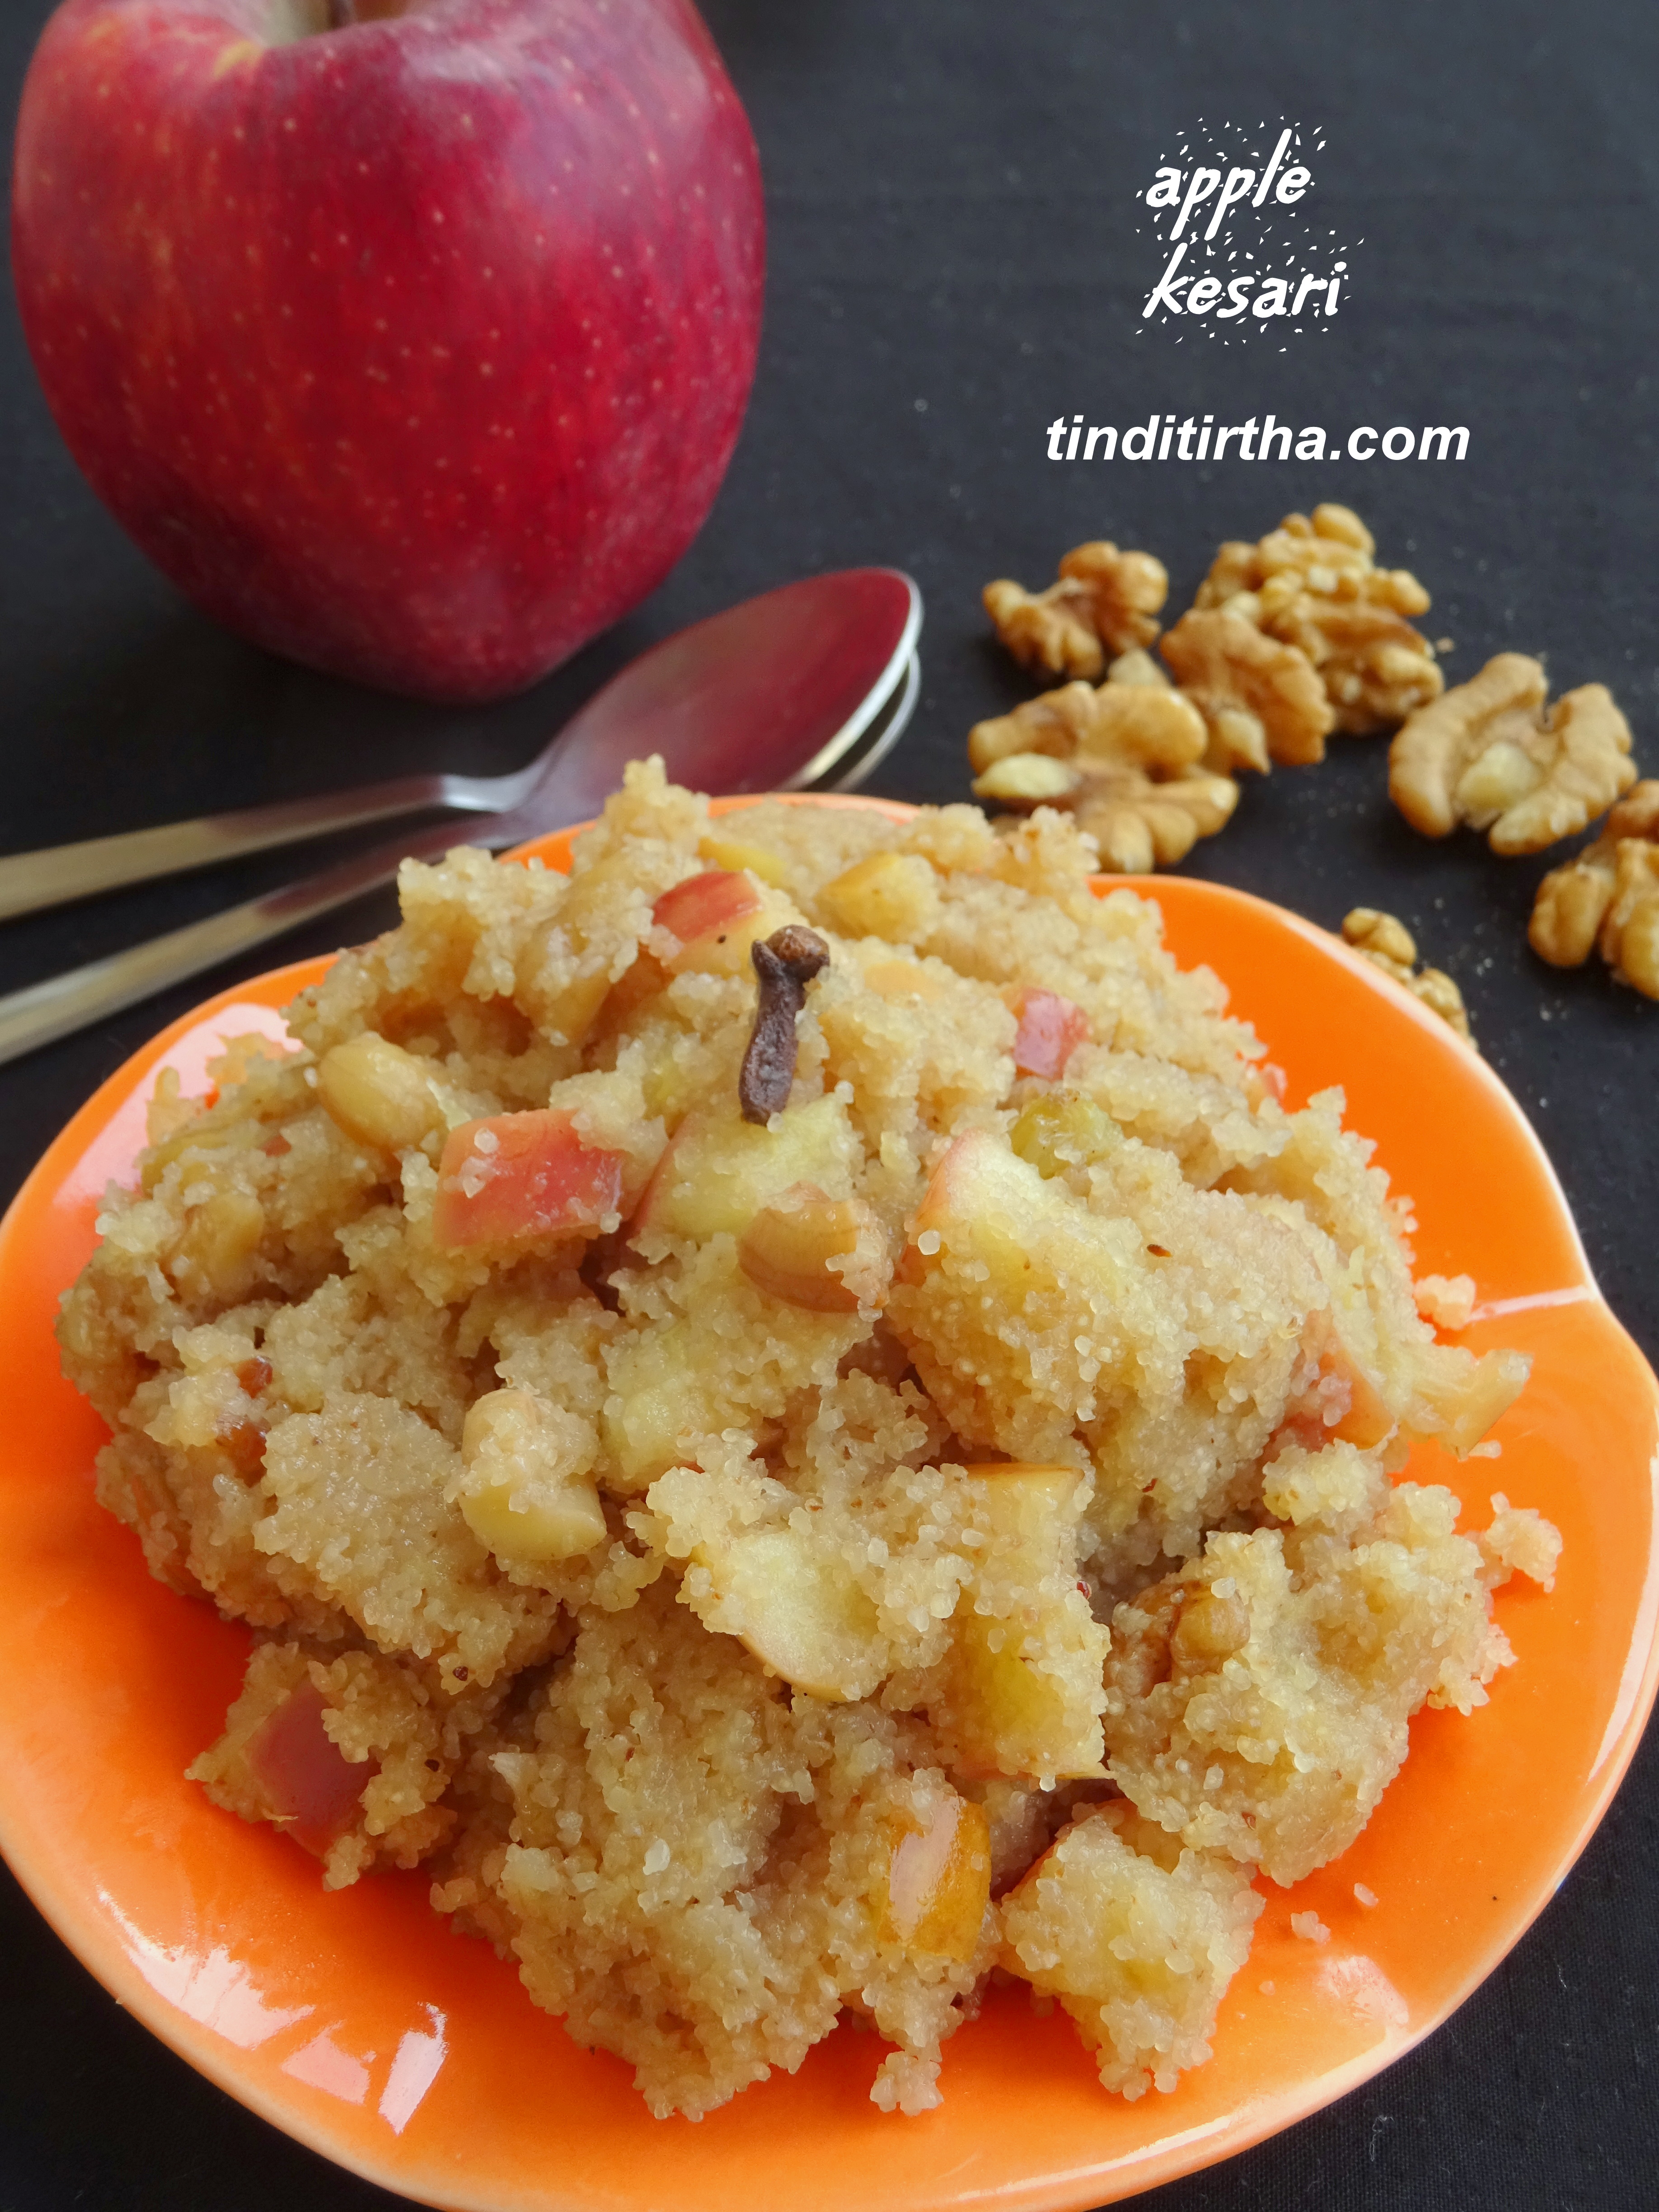 APPLE KESARI along with the goodness of walnuts